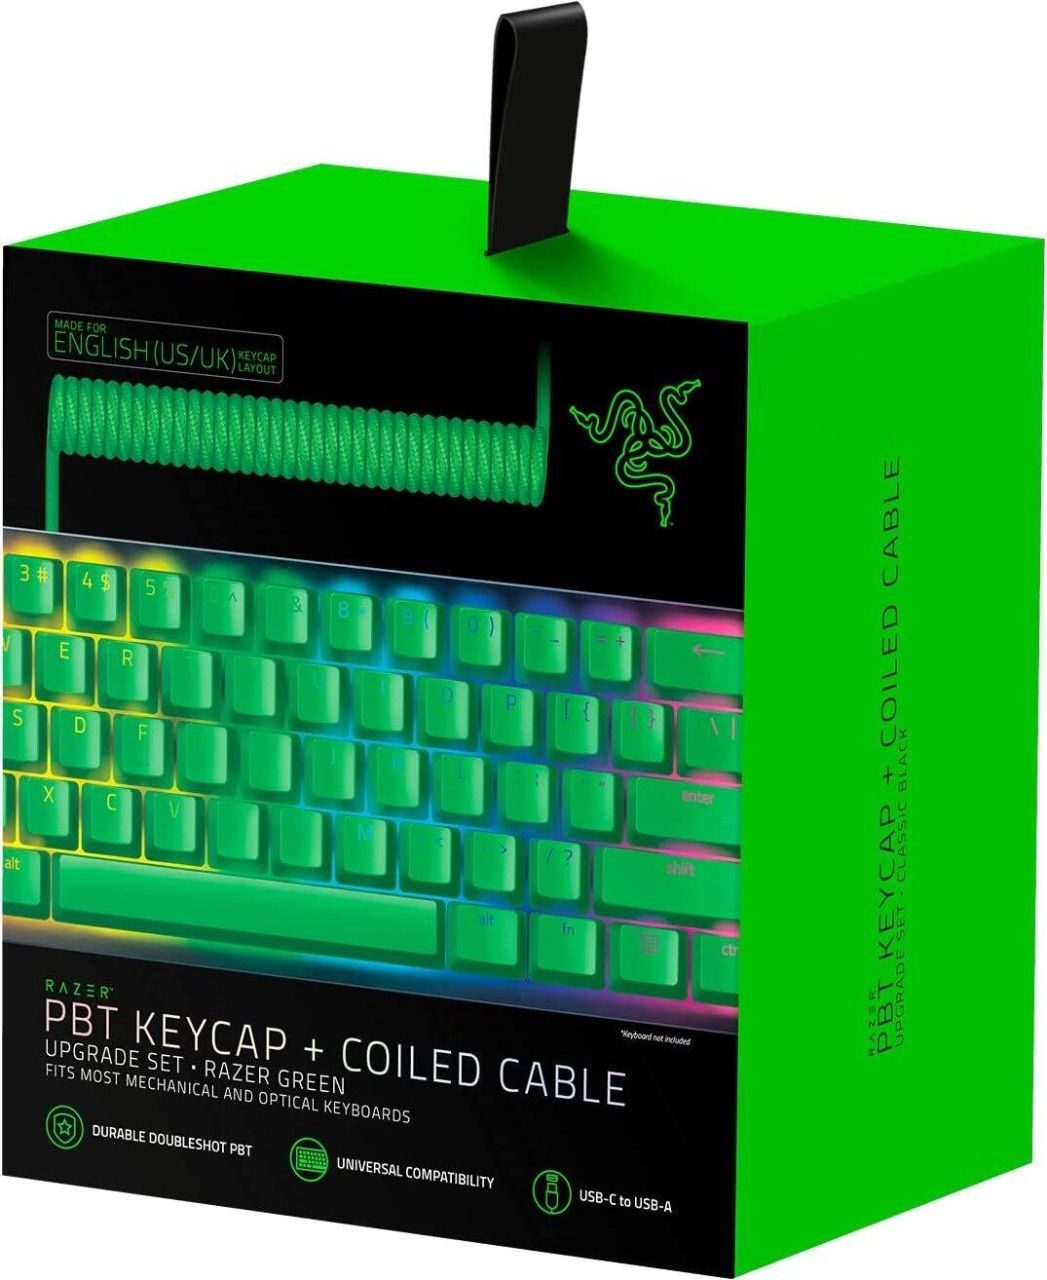 Razer PBT Keycap + Coiled Cable Upgrade Set, Green